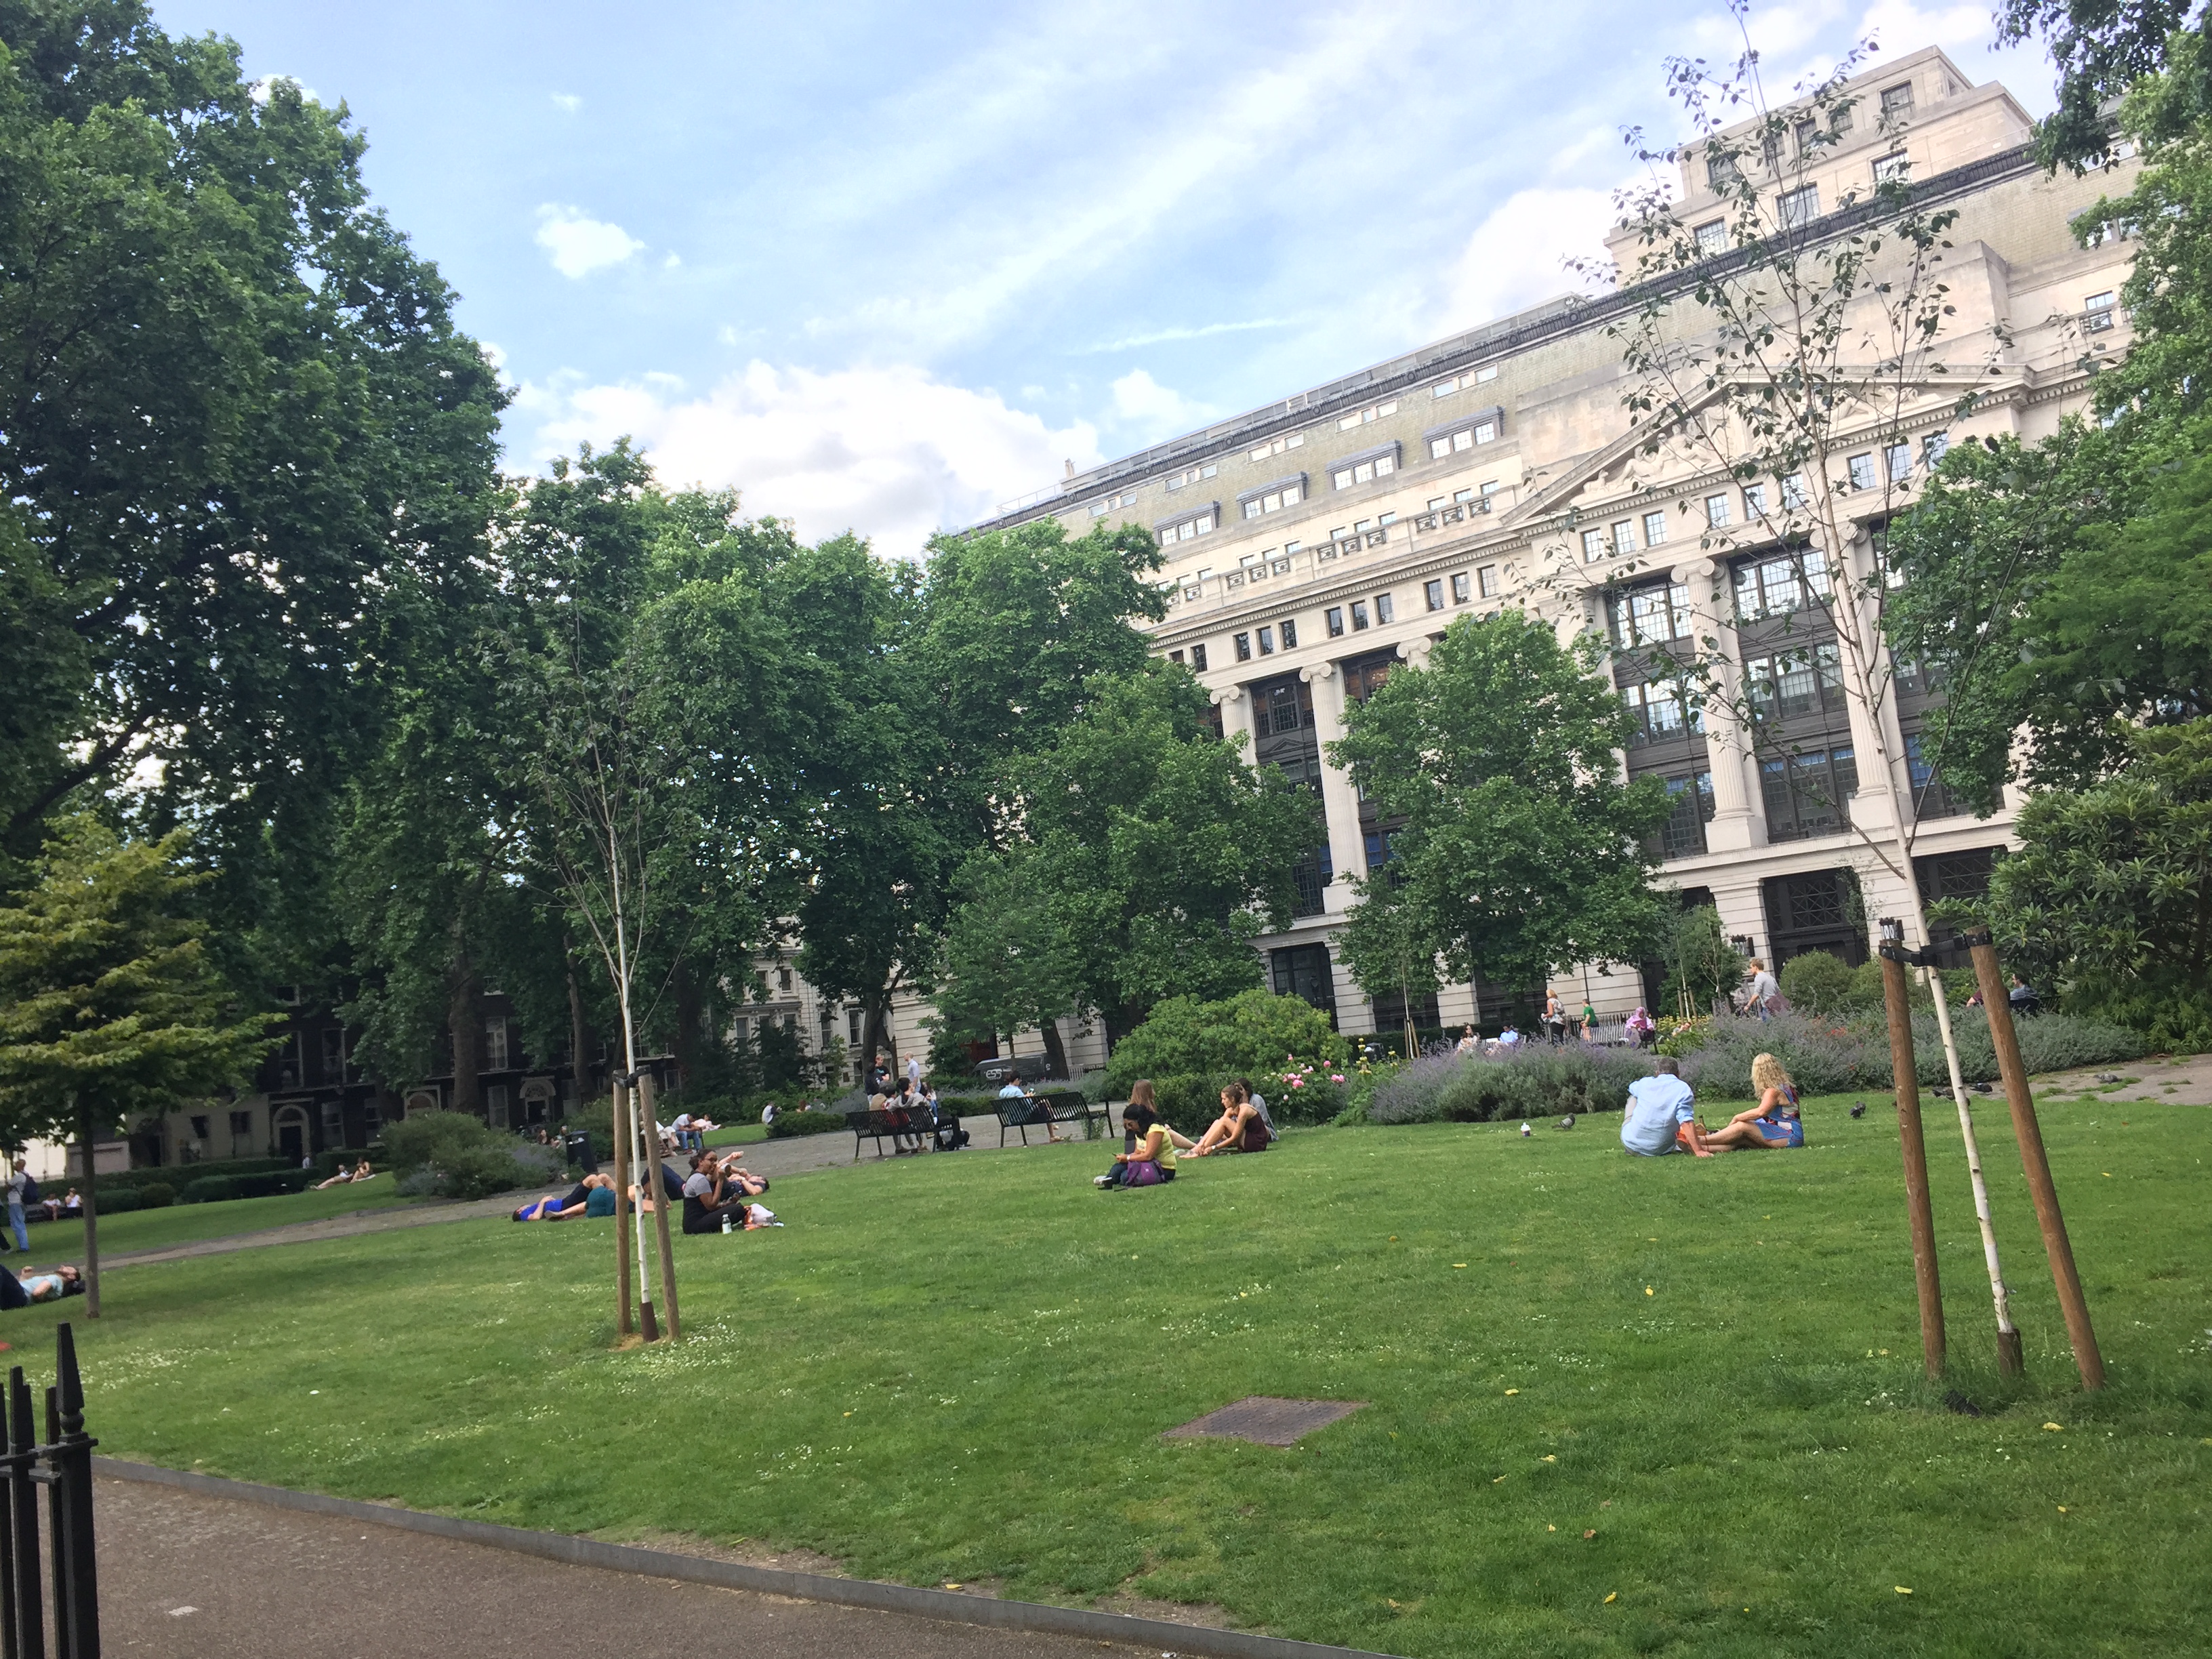 People relaxing on the grass in Bloomsbury Square.